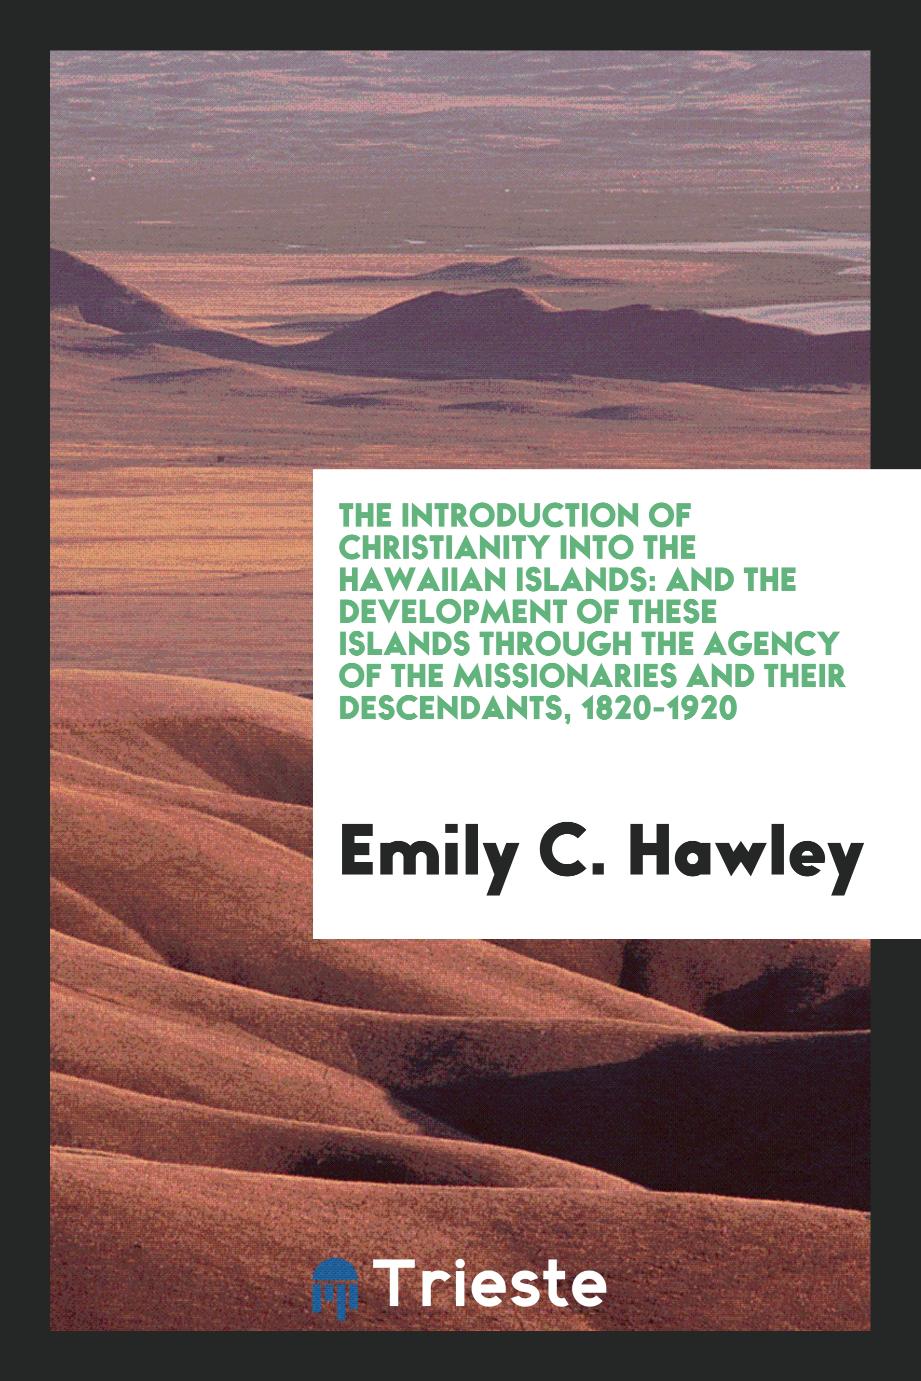 The Introduction of Christianity Into the Hawaiian Islands: And the Development of These Islands through the agency of the missionaries and their descendants, 1820-1920